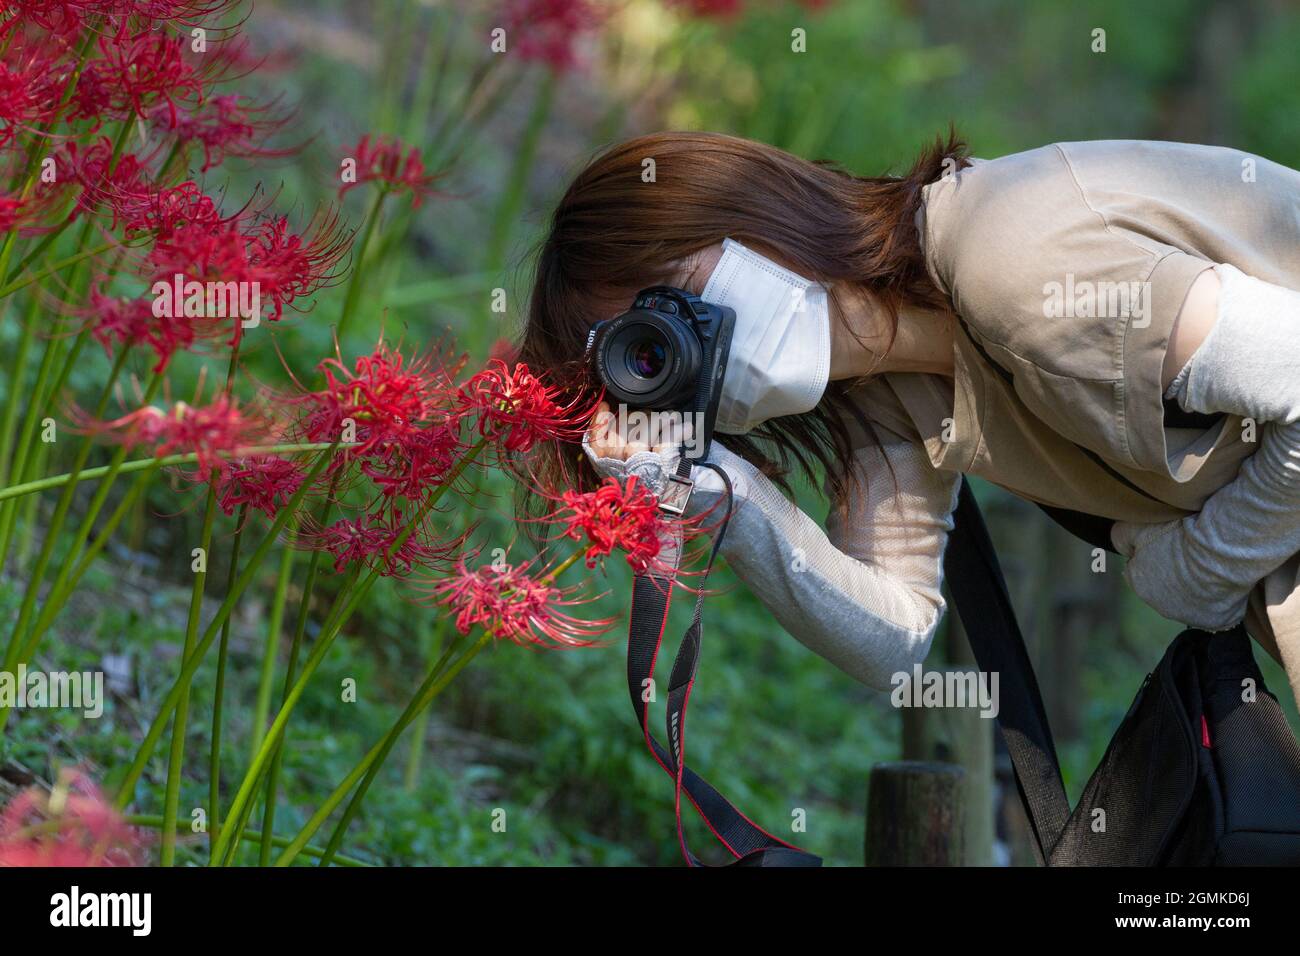 Yamato, Japan. 19th Sep, 2021. A woman takes photographs of the Red Spider  Lilies (Lycoris radiata) in Izumi no Mori park.The Red Spider Lily, also  known as the equinox flower, is a